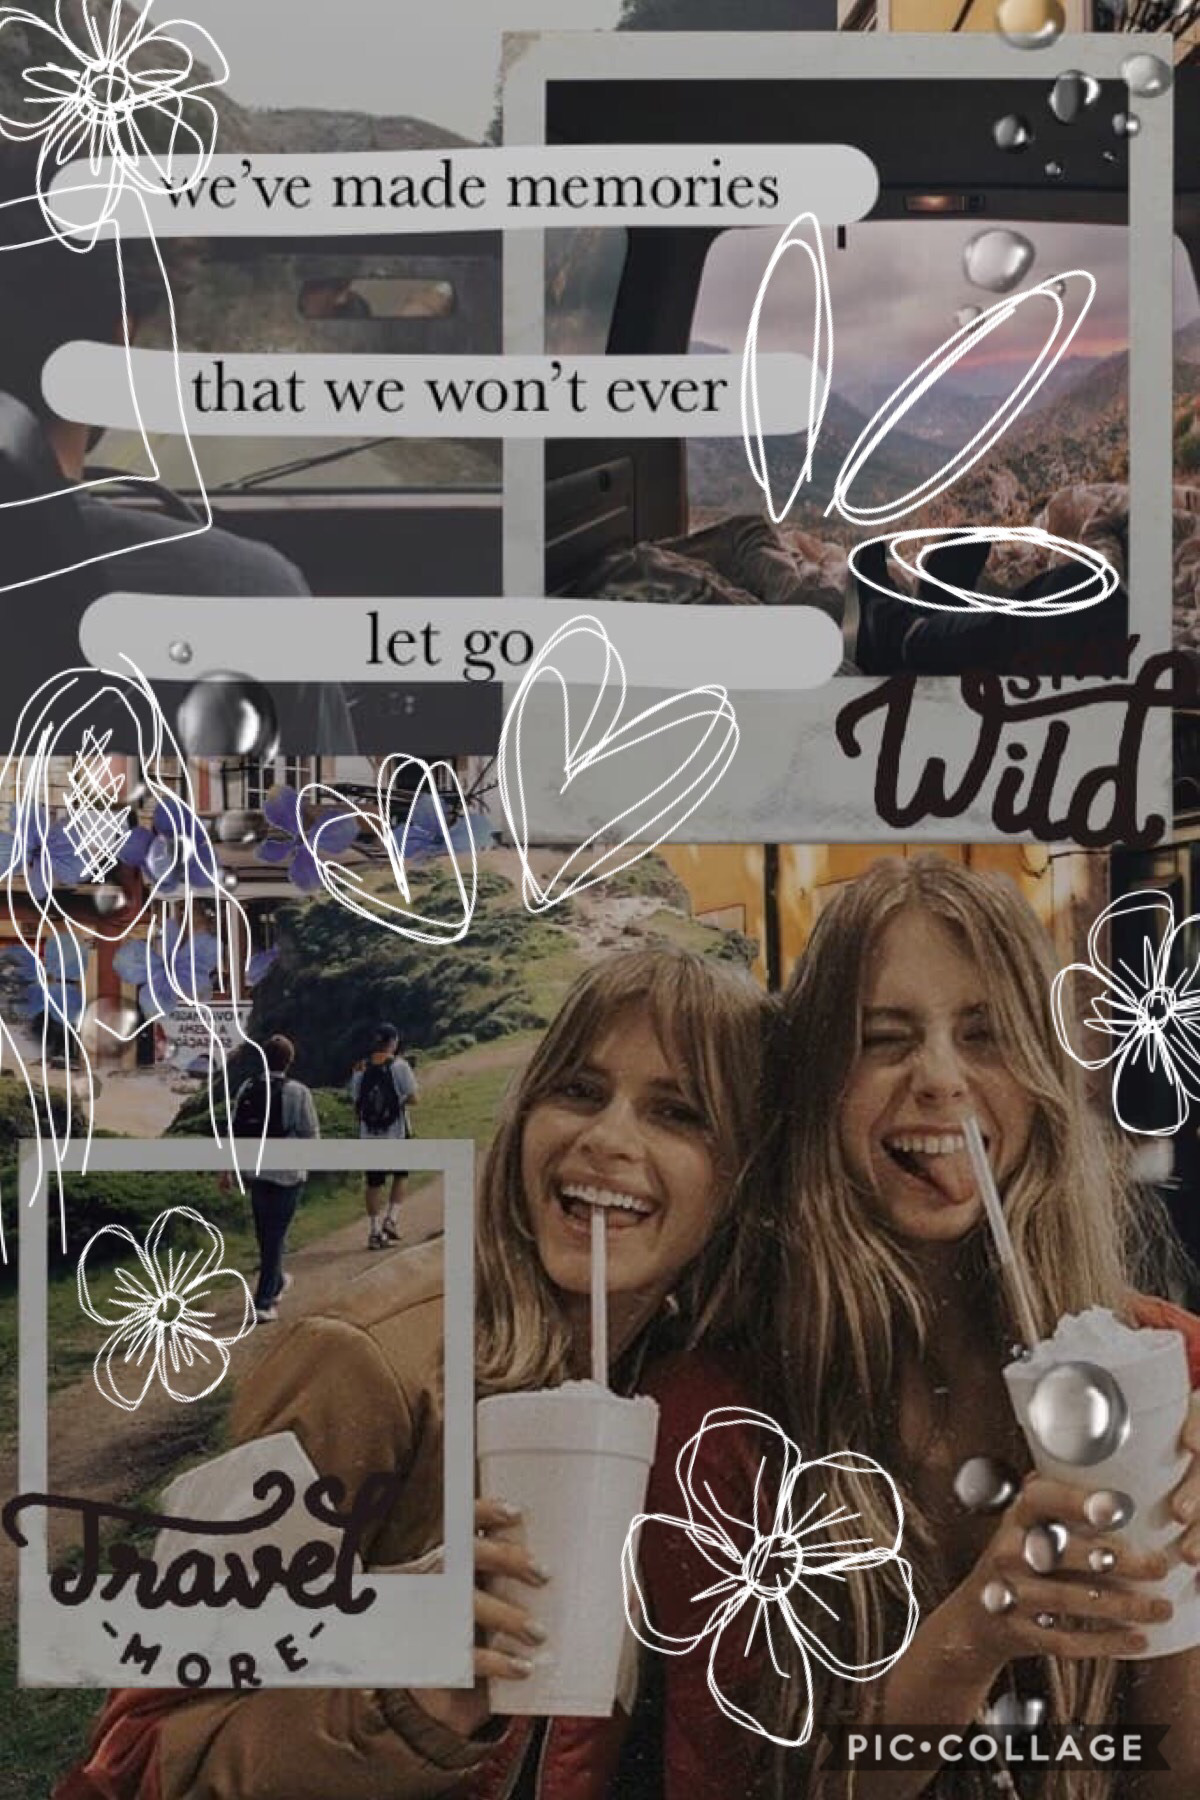 tap
hello
only one more week of school and then i am officially in high school
😱
Anyways, QOTD: What do you like most about pic collage?
AOTD: for me, pic collage is all about expression and creativity